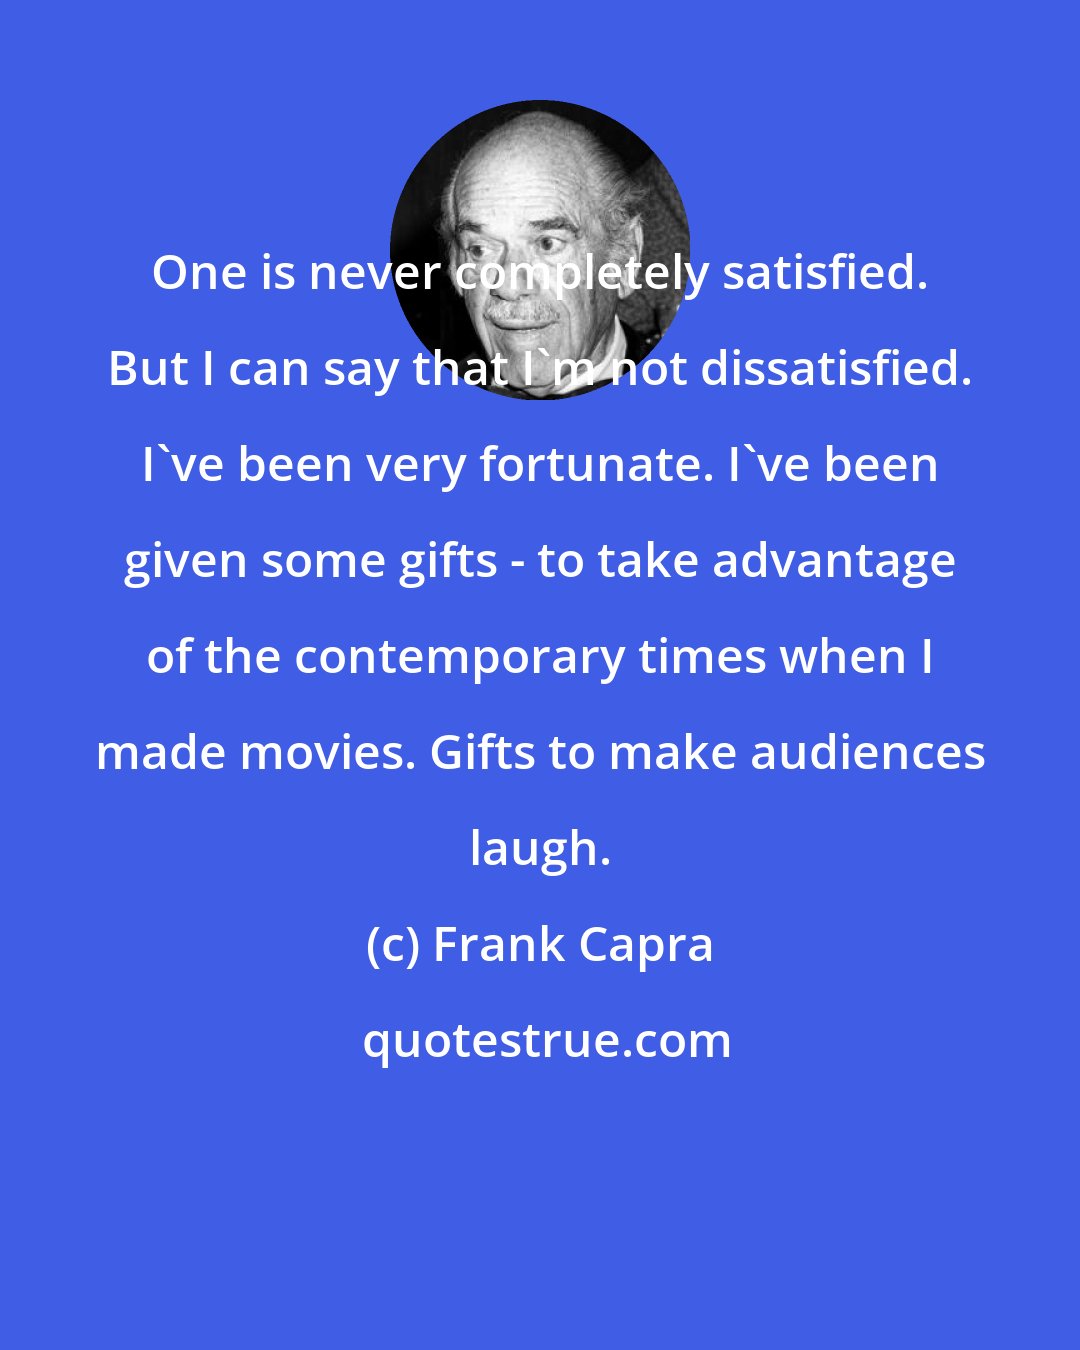 Frank Capra: One is never completely satisfied. But I can say that I'm not dissatisfied. I've been very fortunate. I've been given some gifts - to take advantage of the contemporary times when I made movies. Gifts to make audiences laugh.